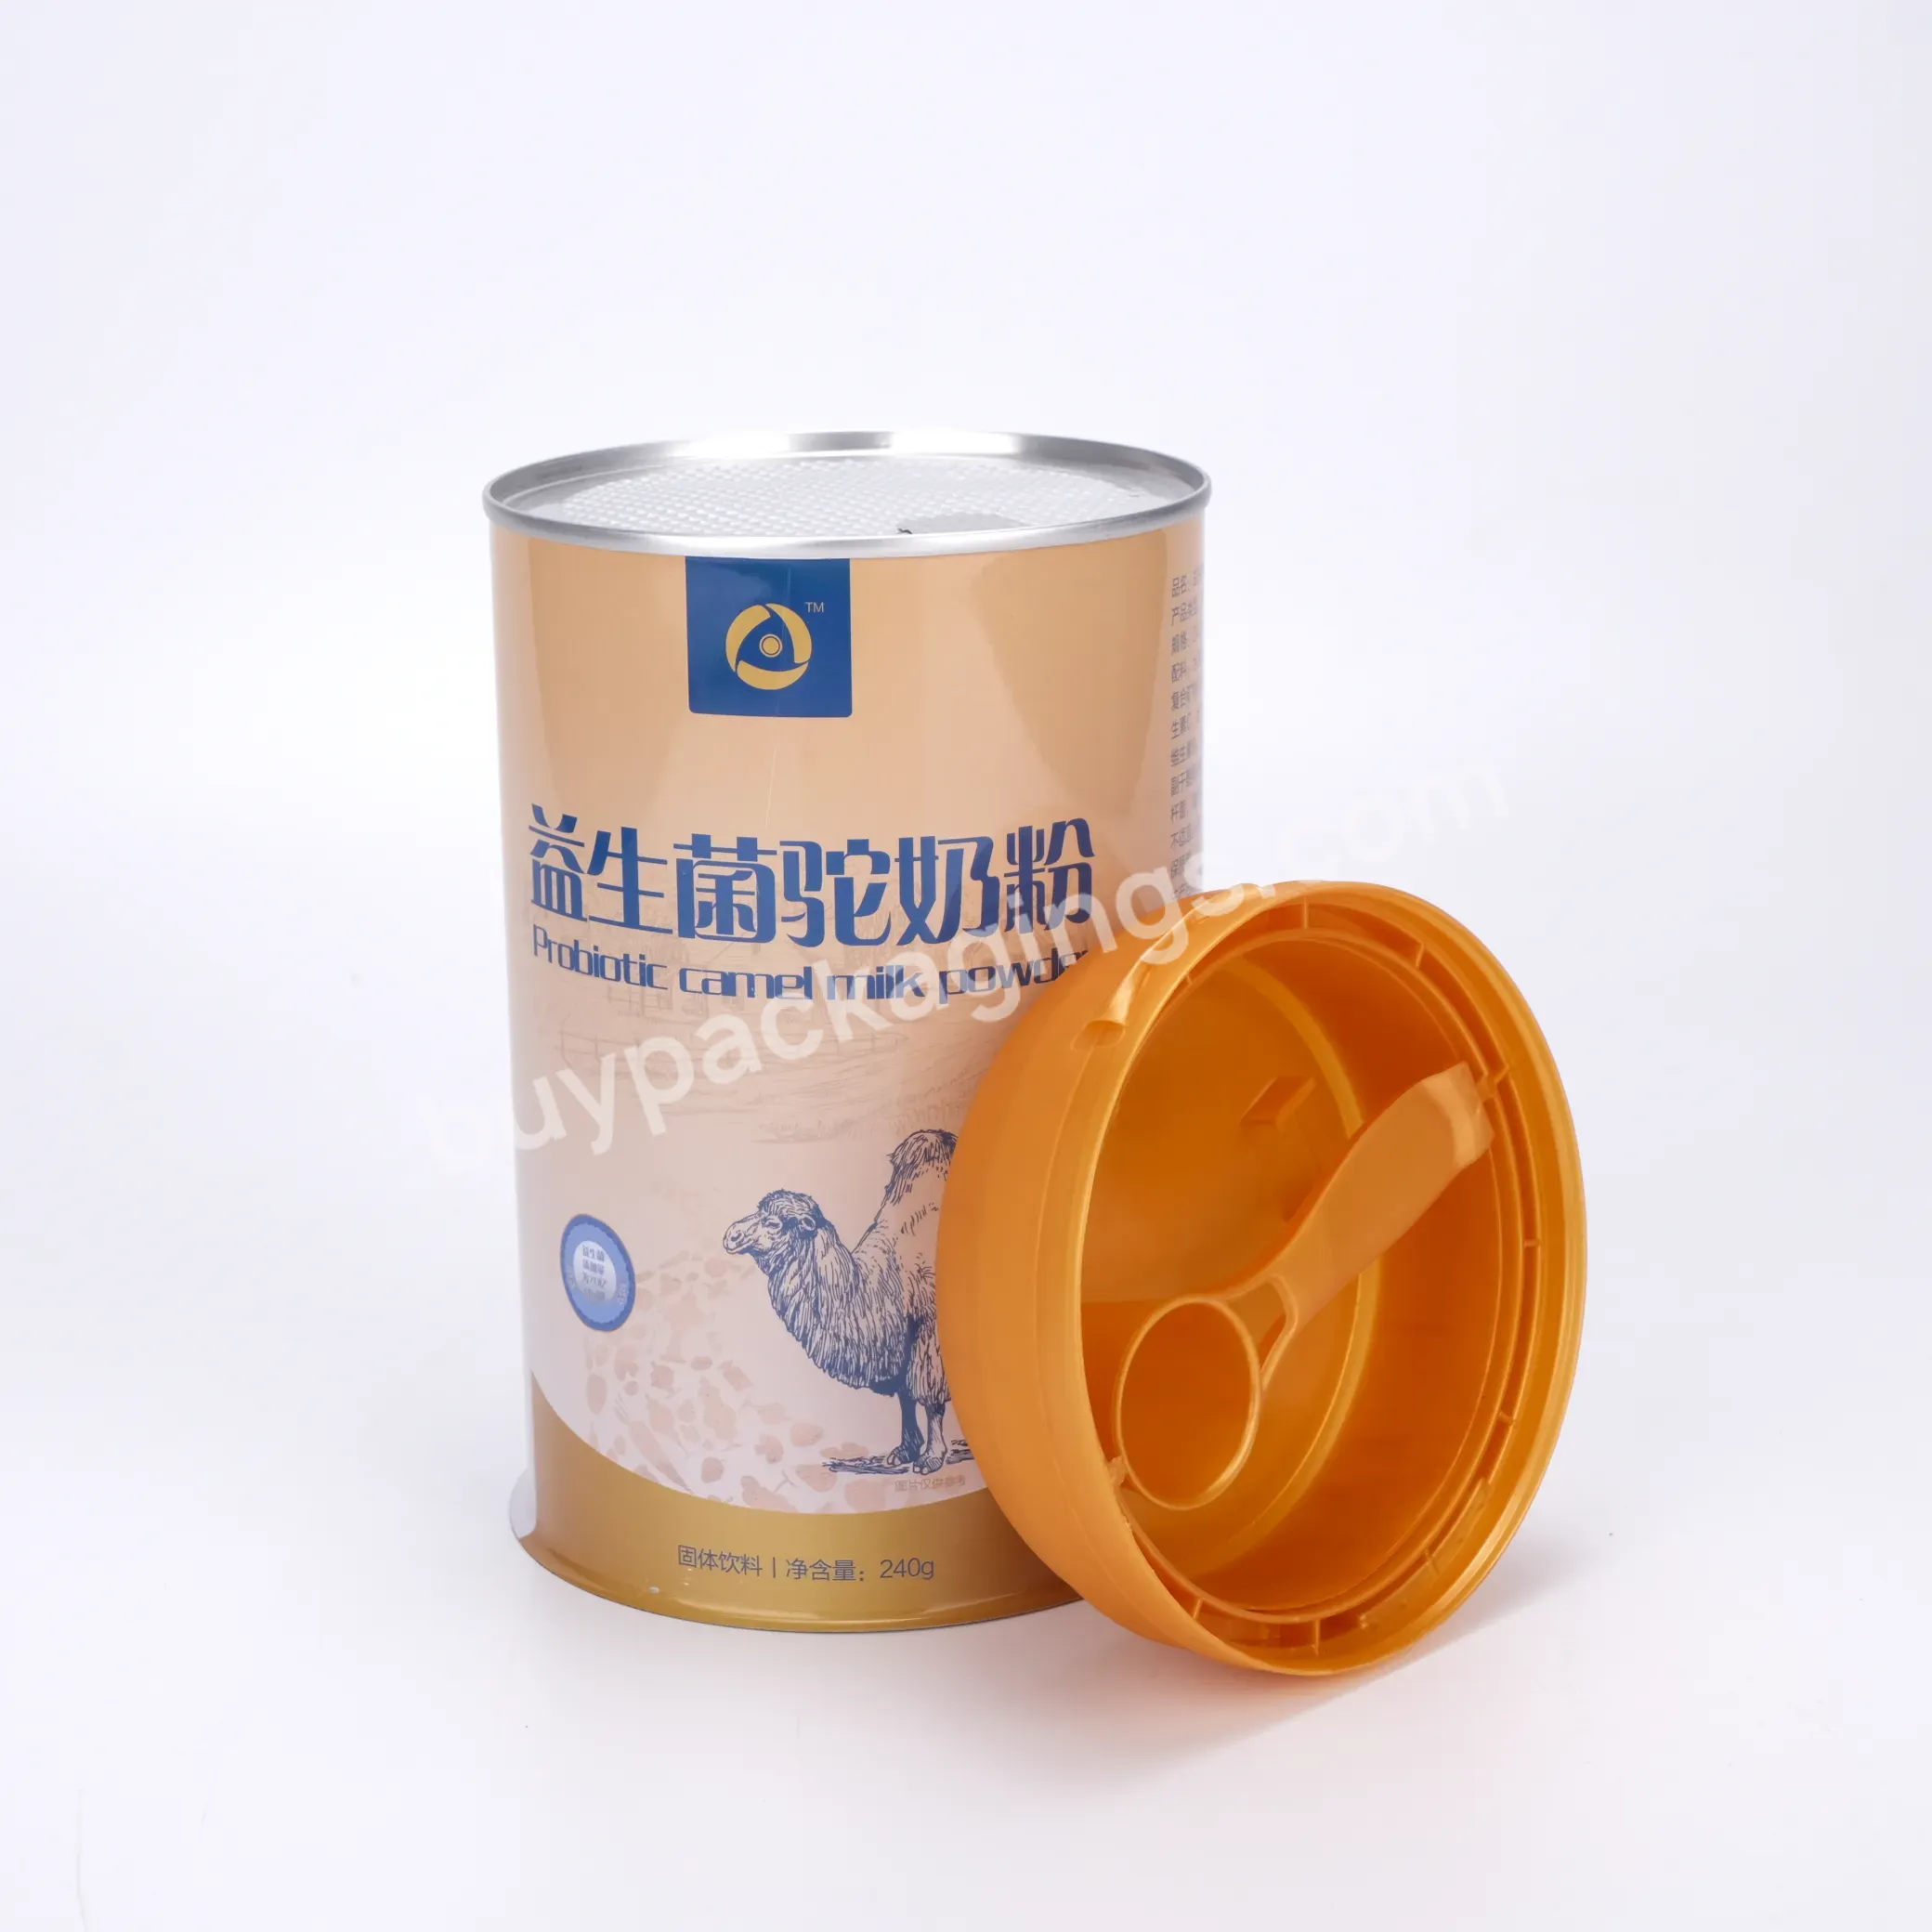 Metal Milk Powder Sell In Bulk Can Moisture Proof With Both Metal/plastic Lids For Business Use